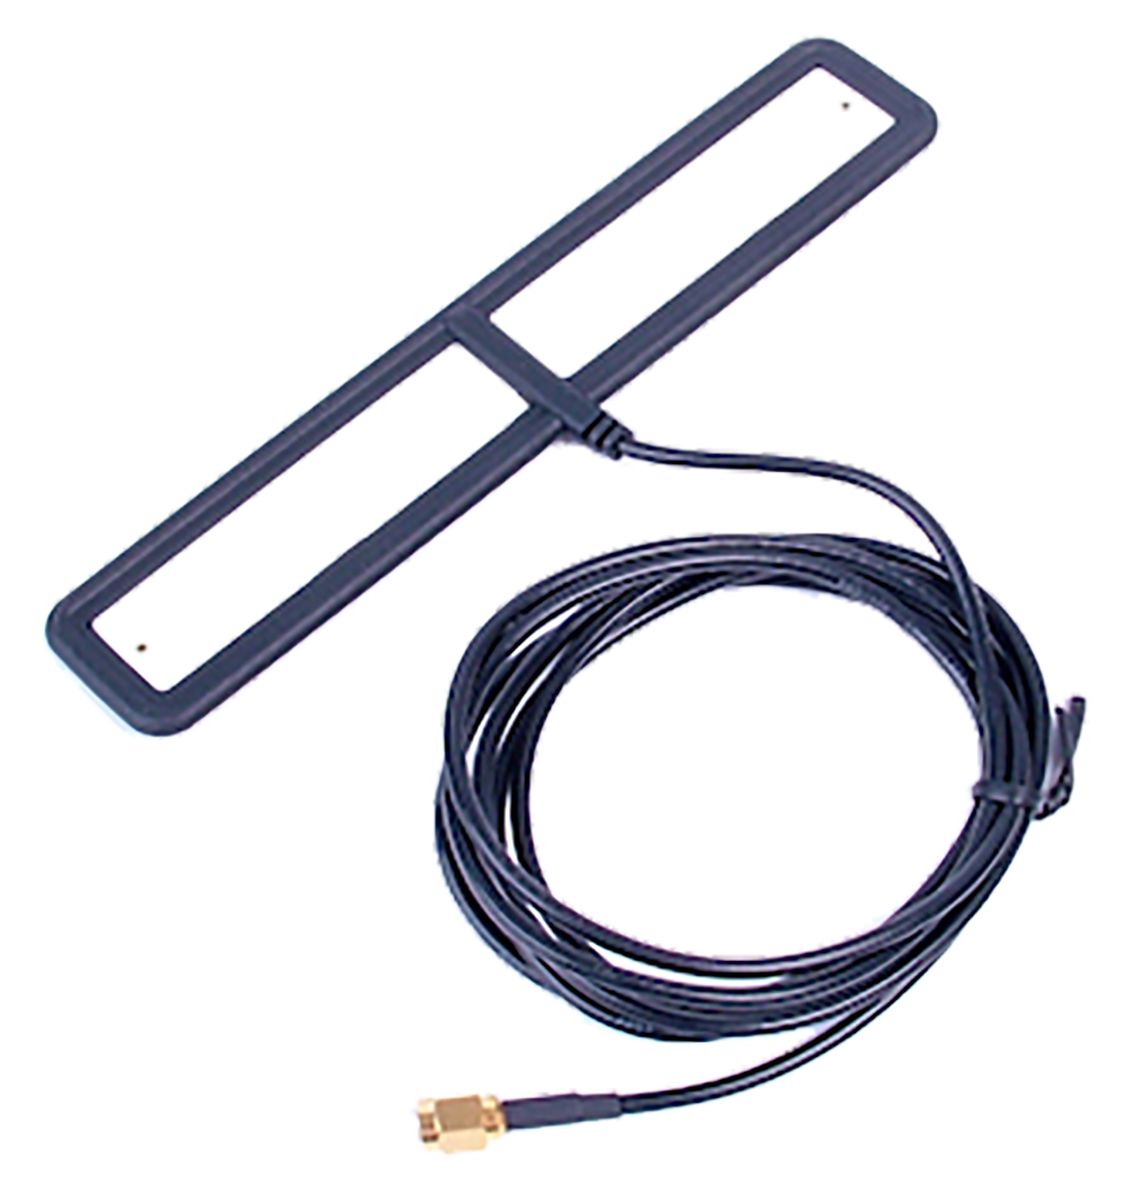 Siretta ALPHA40/2.5M/SMAM/S/S/29 T-Bar Multiband Antenna with SMA Connector, 2G (GSM/GPRS), 3G (UTMS), 4G (LTE) 5G